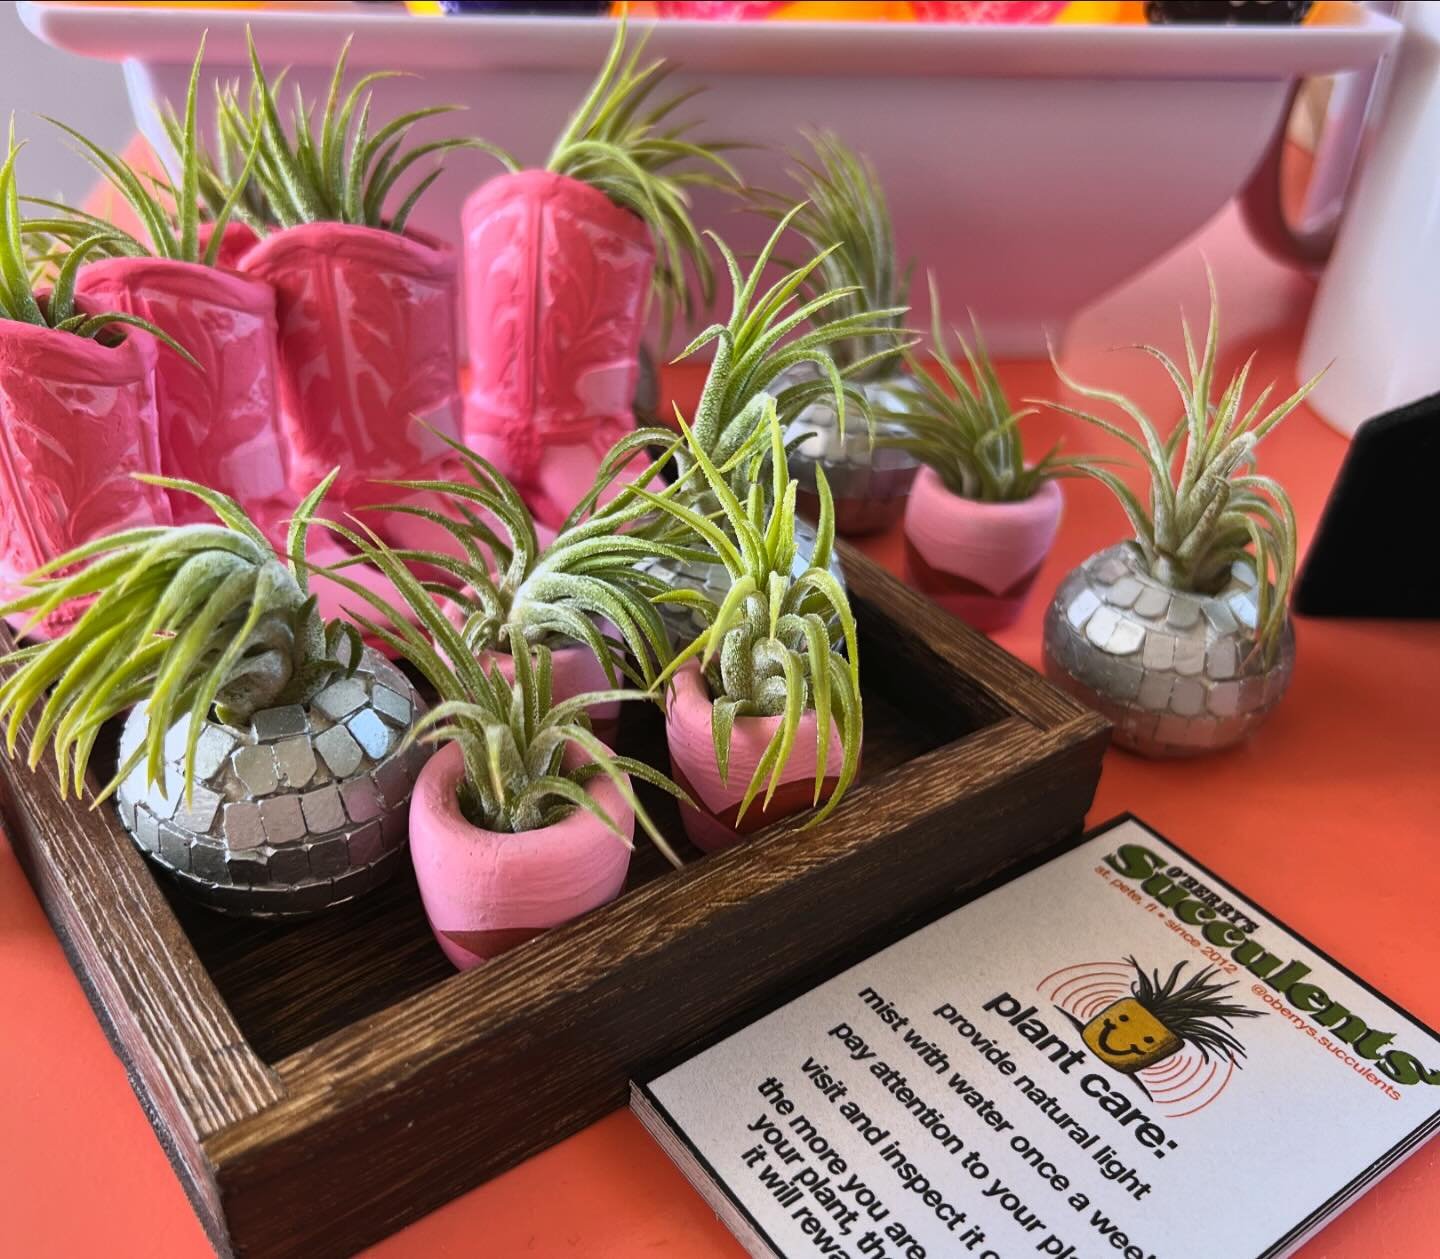 These adorable little air plants are the cutest! Available in disco balls, boots, and clay pot styles. Snag these at our Vegas location! #airplants #discoball #containerpark #downtownlasvegas